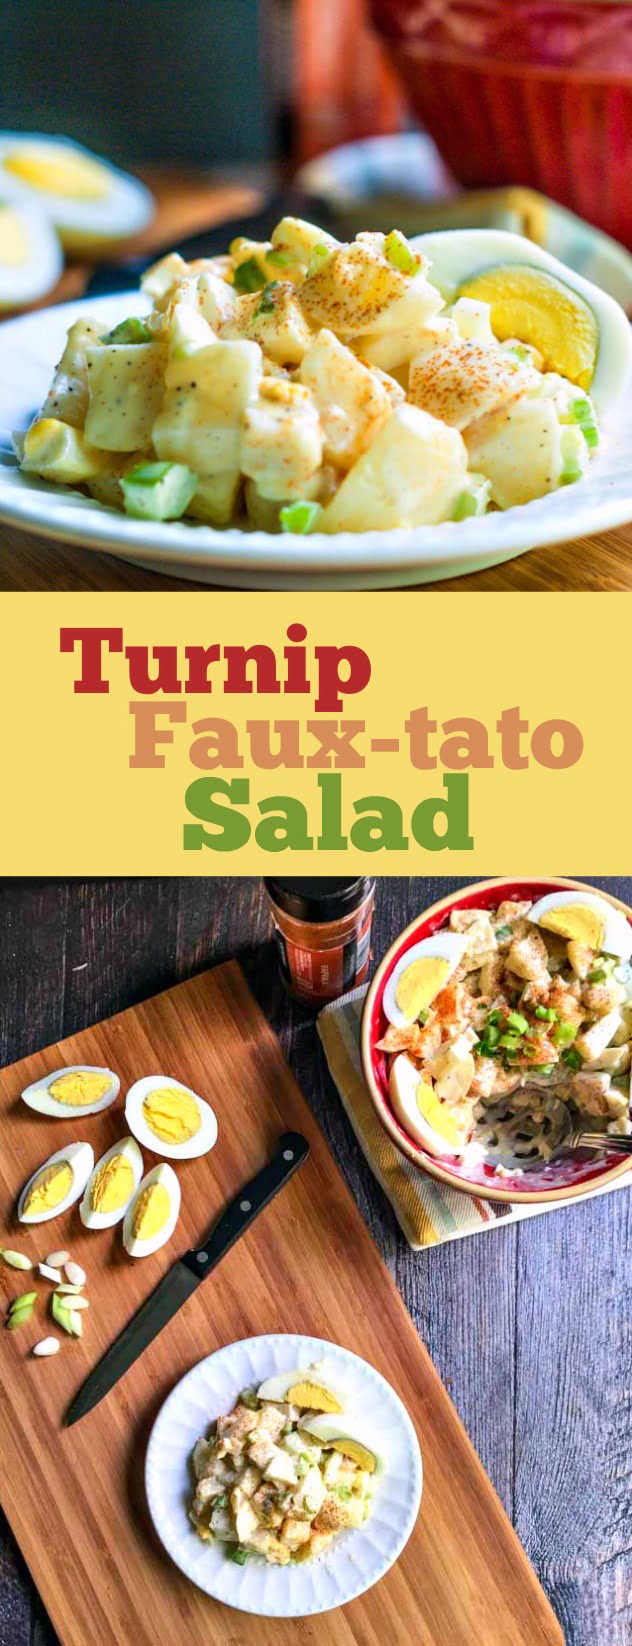 This turnip fauxtato salad is a great low carb alternative to potato salad. Even if you don't care about carbs, it's a delicious way to eat turnips!